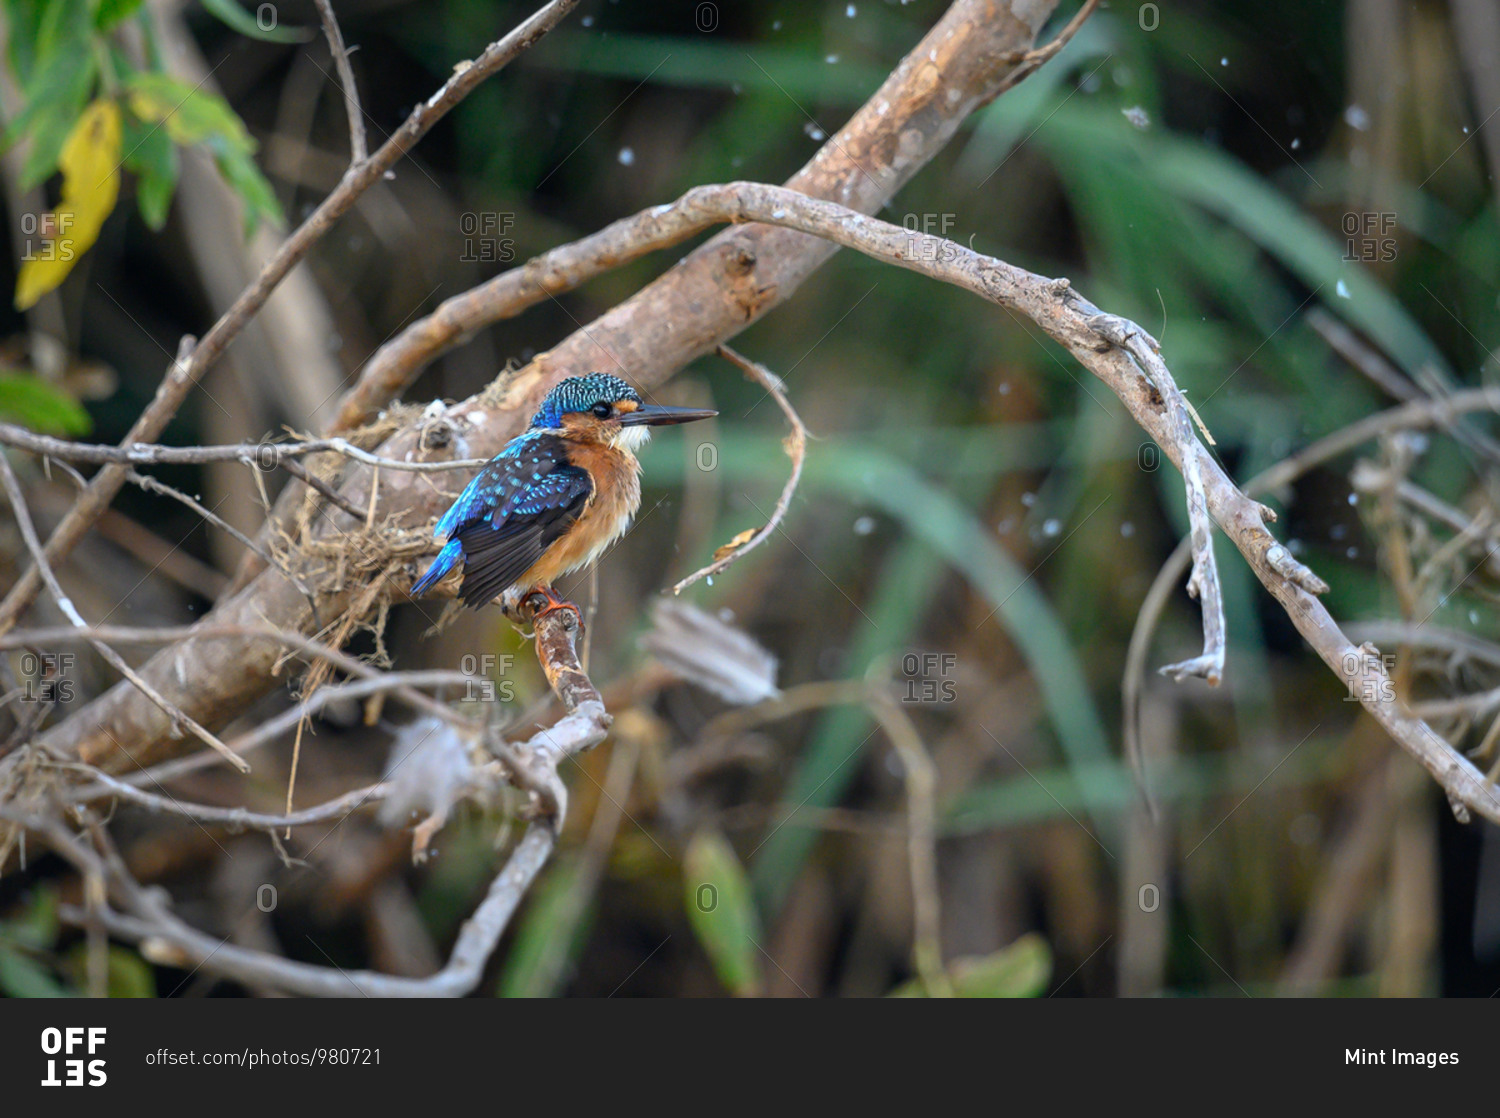 A juvenile malachite kingfisher, Corythornis cristatus, perches on a branch, looking out of frame